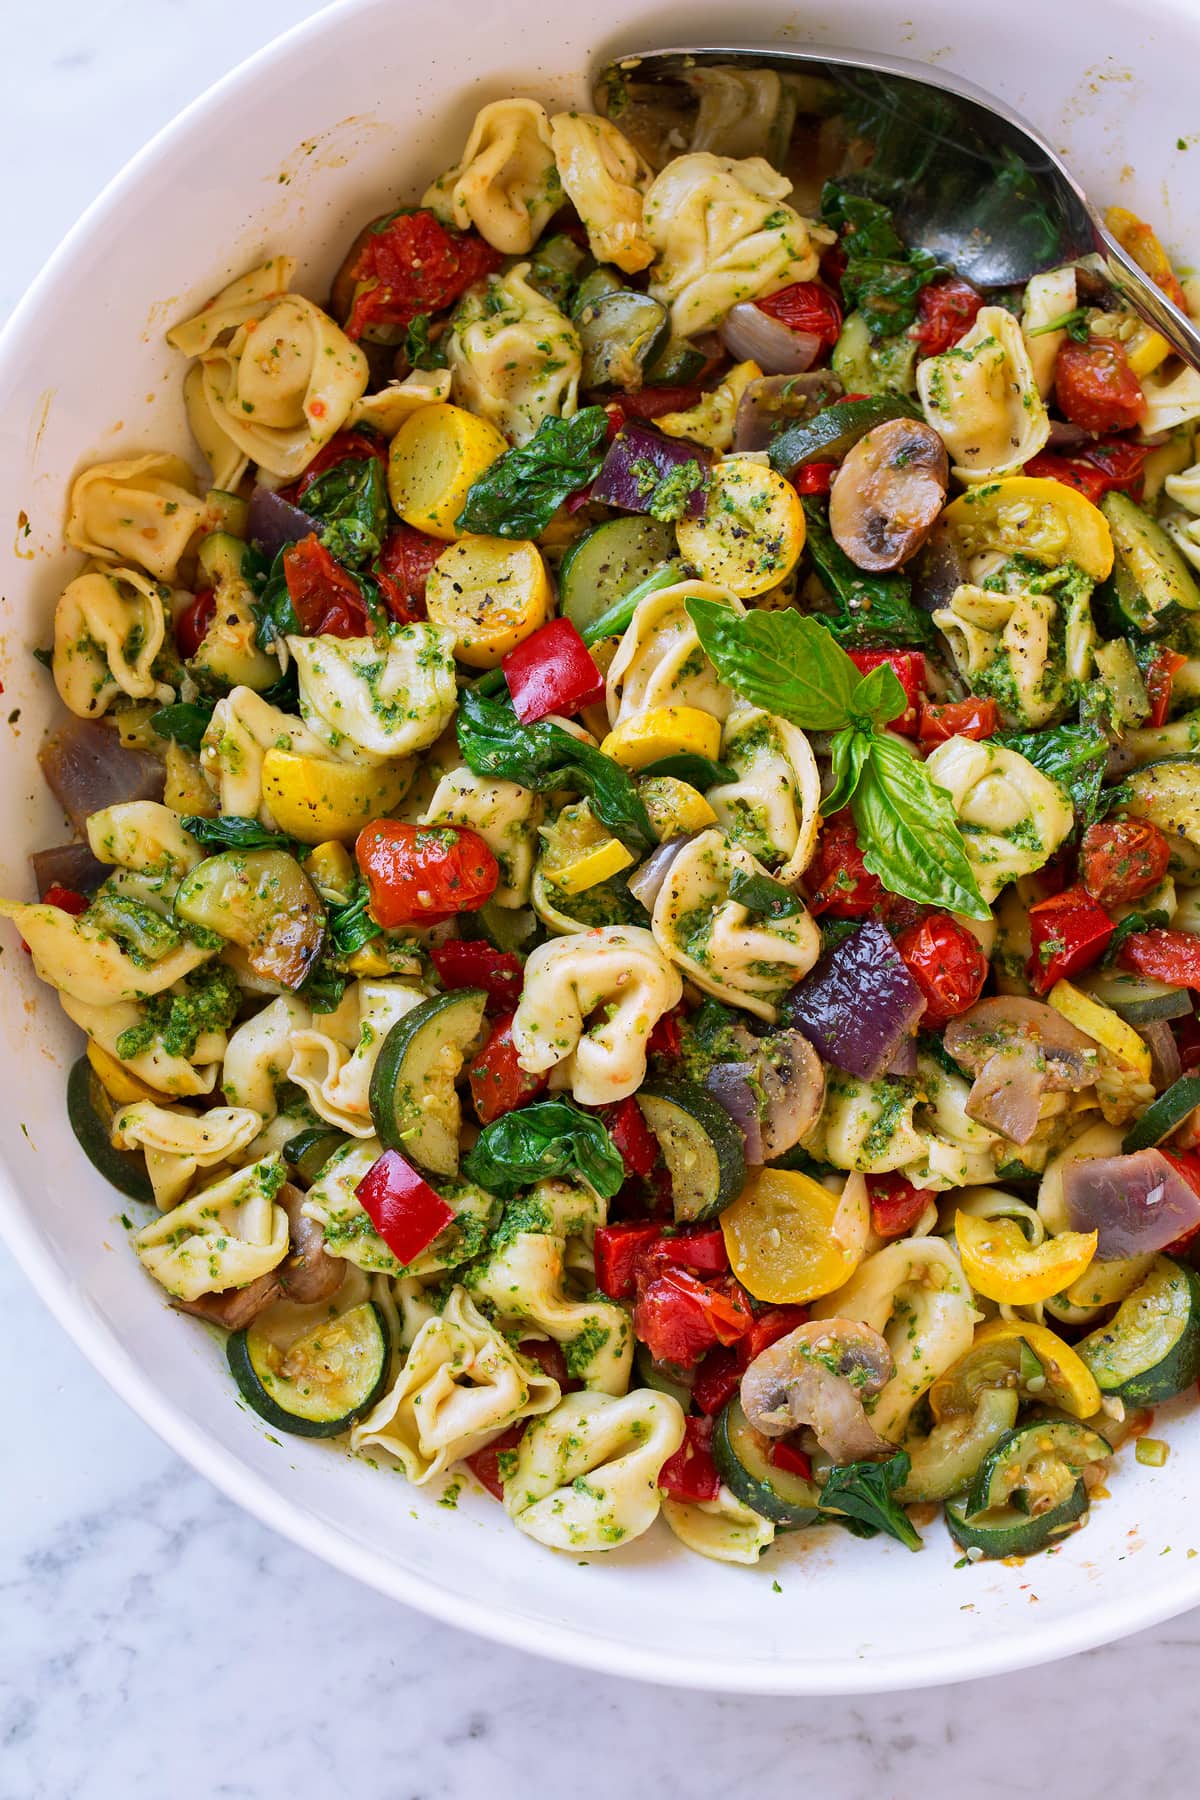 Cheese tortellini with pesto and roasted vegetables.